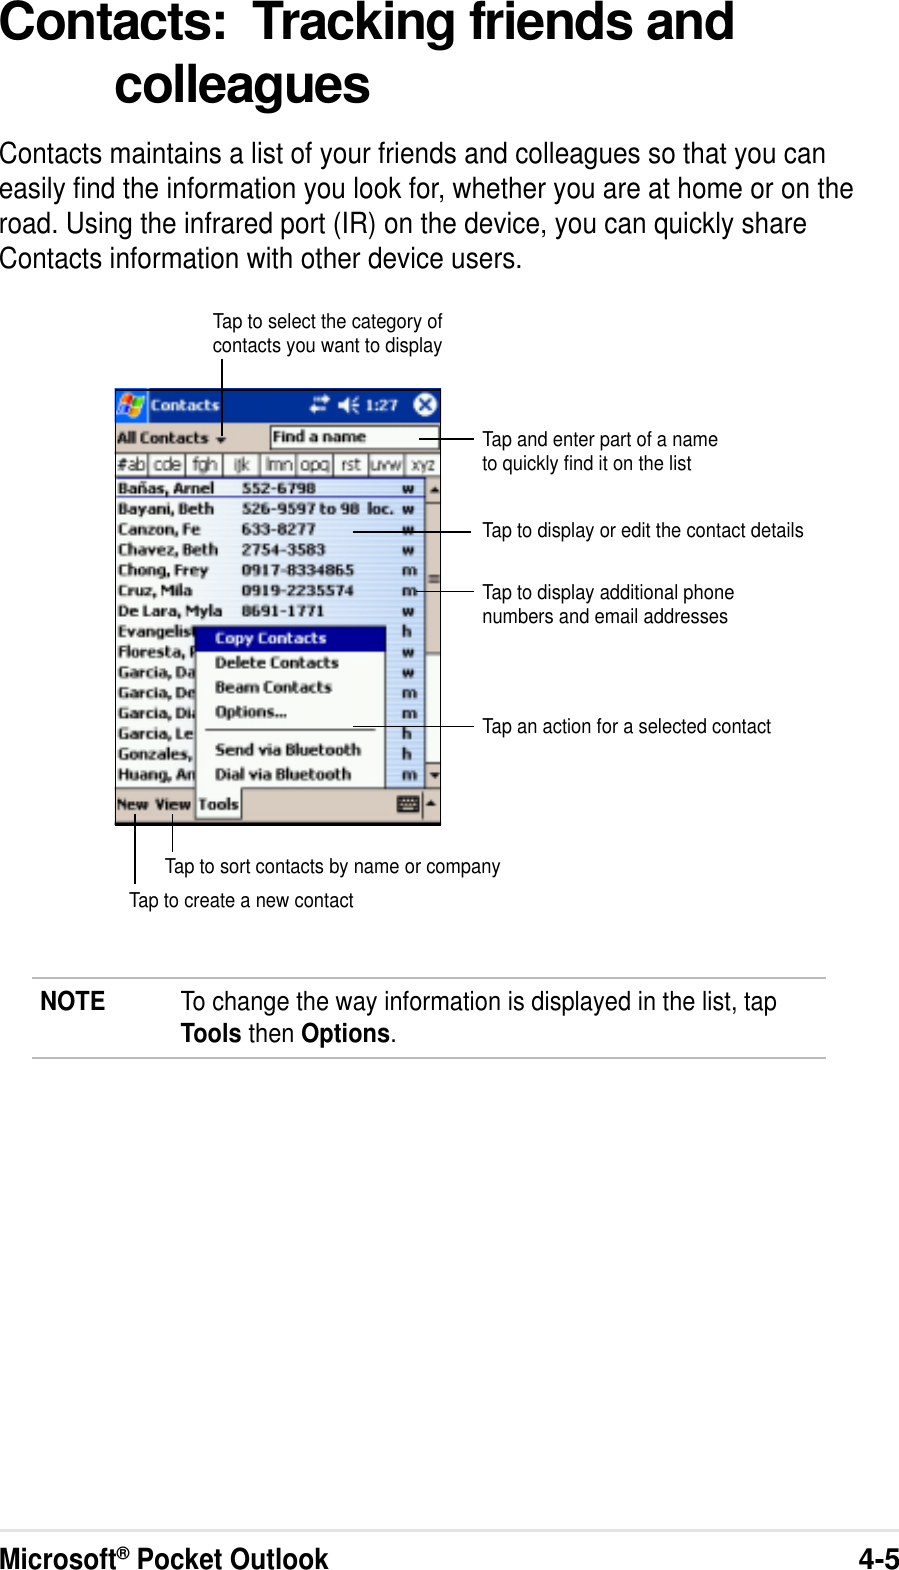 Microsoft® Pocket Outlook4-5Contacts:  Tracking friends andcolleaguesContacts maintains a list of your friends and colleagues so that you caneasily find the information you look for, whether you are at home or on theroad. Using the infrared port (IR) on the device, you can quickly shareContacts information with other device users.NOTE To change the way information is displayed in the list, tapTools then Options.Tap and enter part of a nameto quickly find it on the listTap to select the category ofcontacts you want to displayTap to display additional phonenumbers and email addressesTap to display or edit the contact detailsTap to create a new contactTap to sort contacts by name or companyTap an action for a selected contact